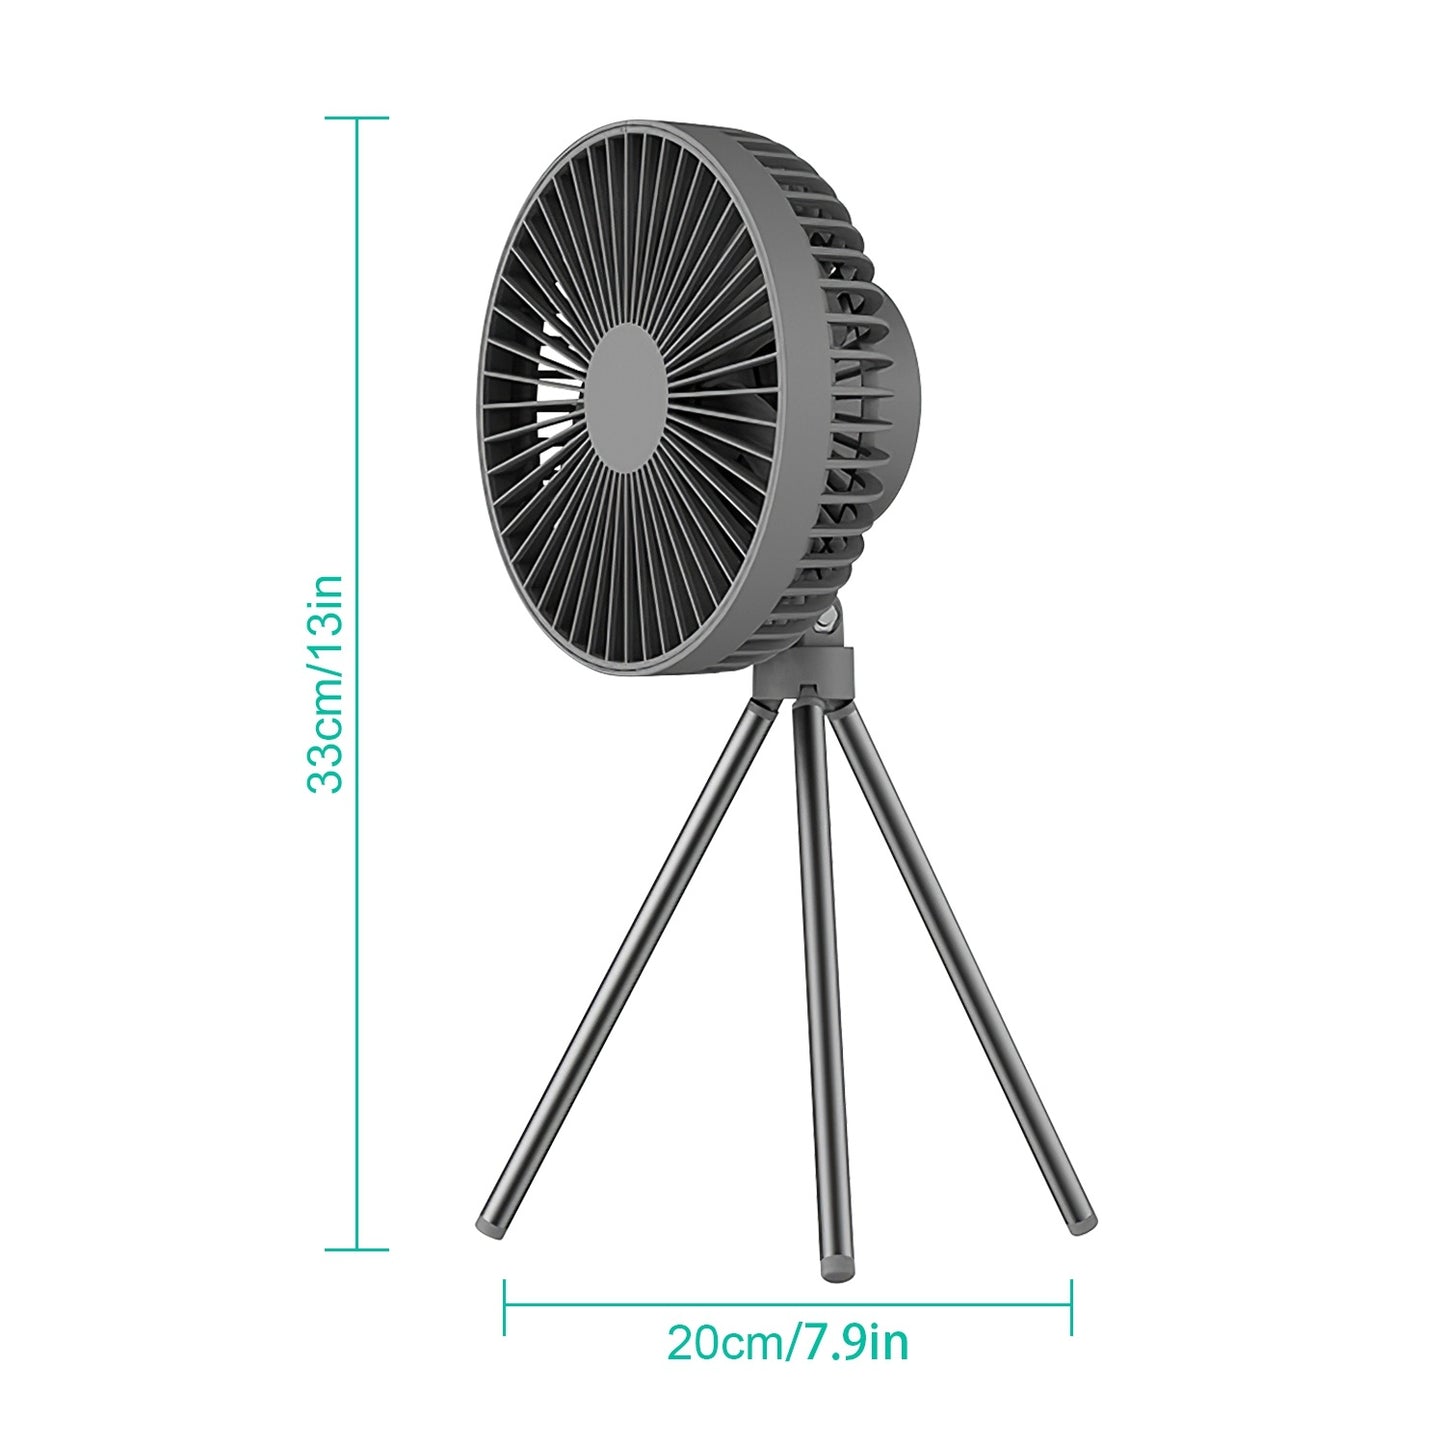 Portable Camping Fan Rechargeable Battery Powered Foldable Tripod Fan for Tent with Hanging Hook Carabiner Personal Desk Fan with 3 Speed Setting for Travel Hiking Fishing